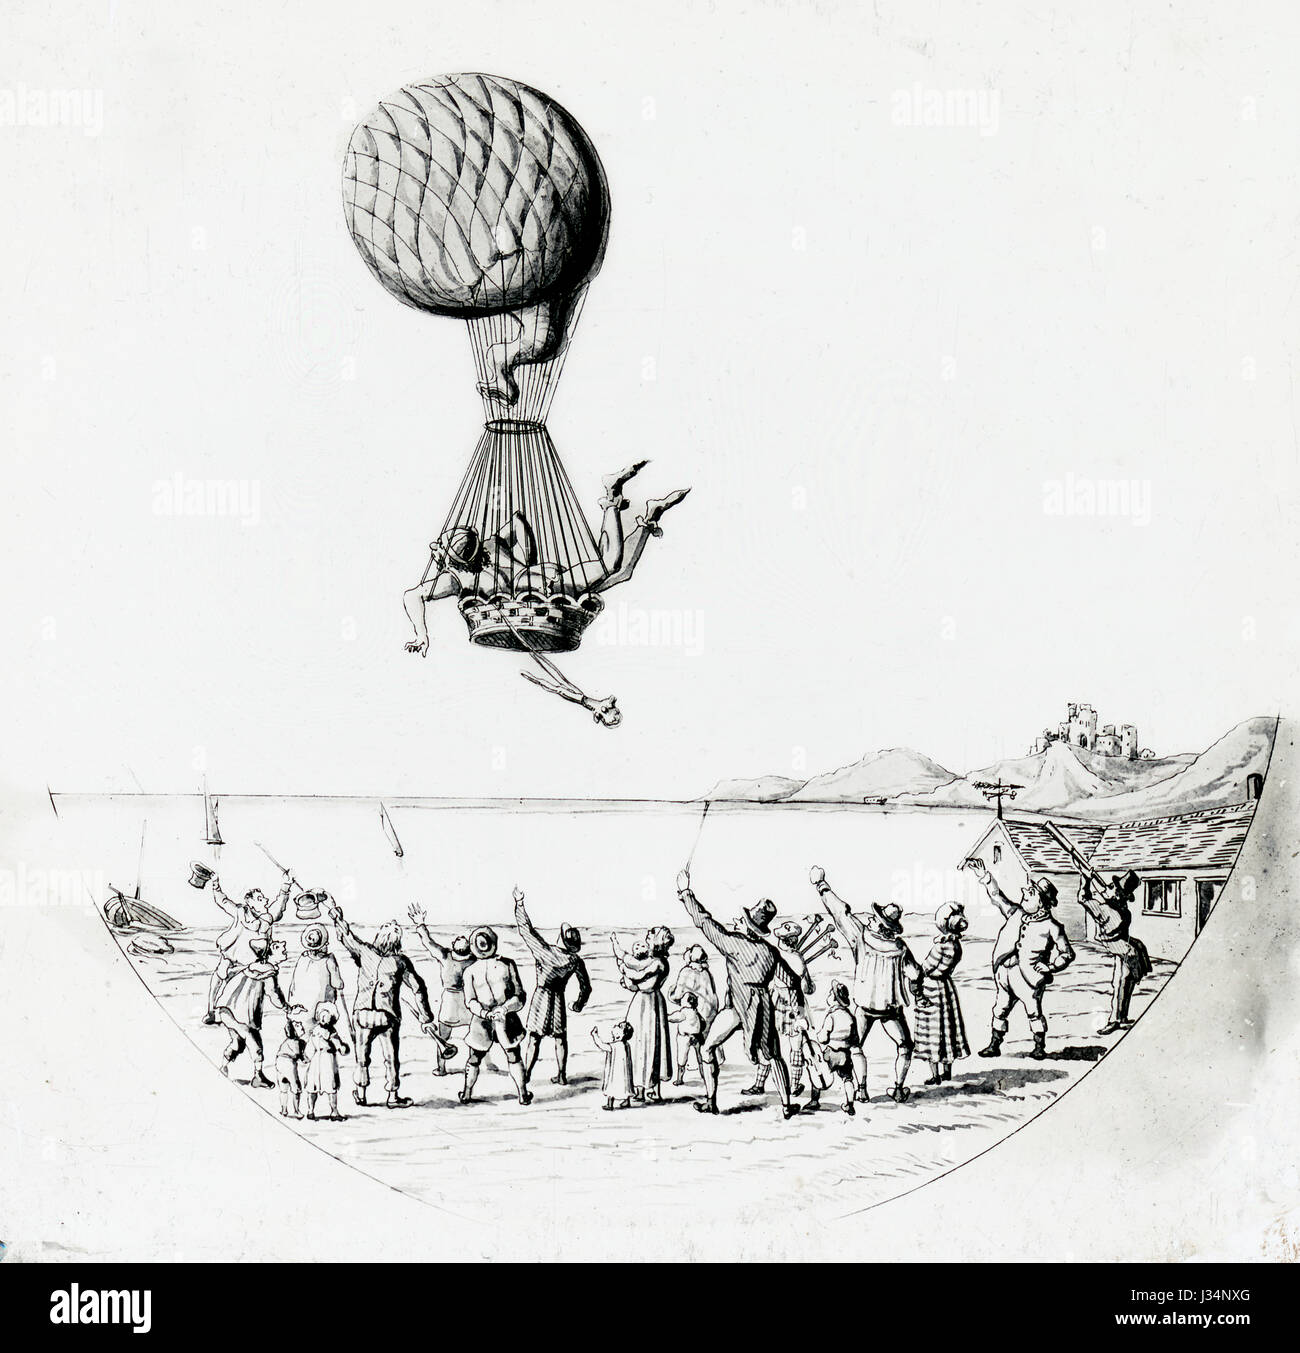 Antique c1800 image, a man taking flight in a hot air balloon, the stake and cord trailing behind, as the crowd cheers. SOURCE: LATER GENERATION PHOTOGRAPH. Stock Photo